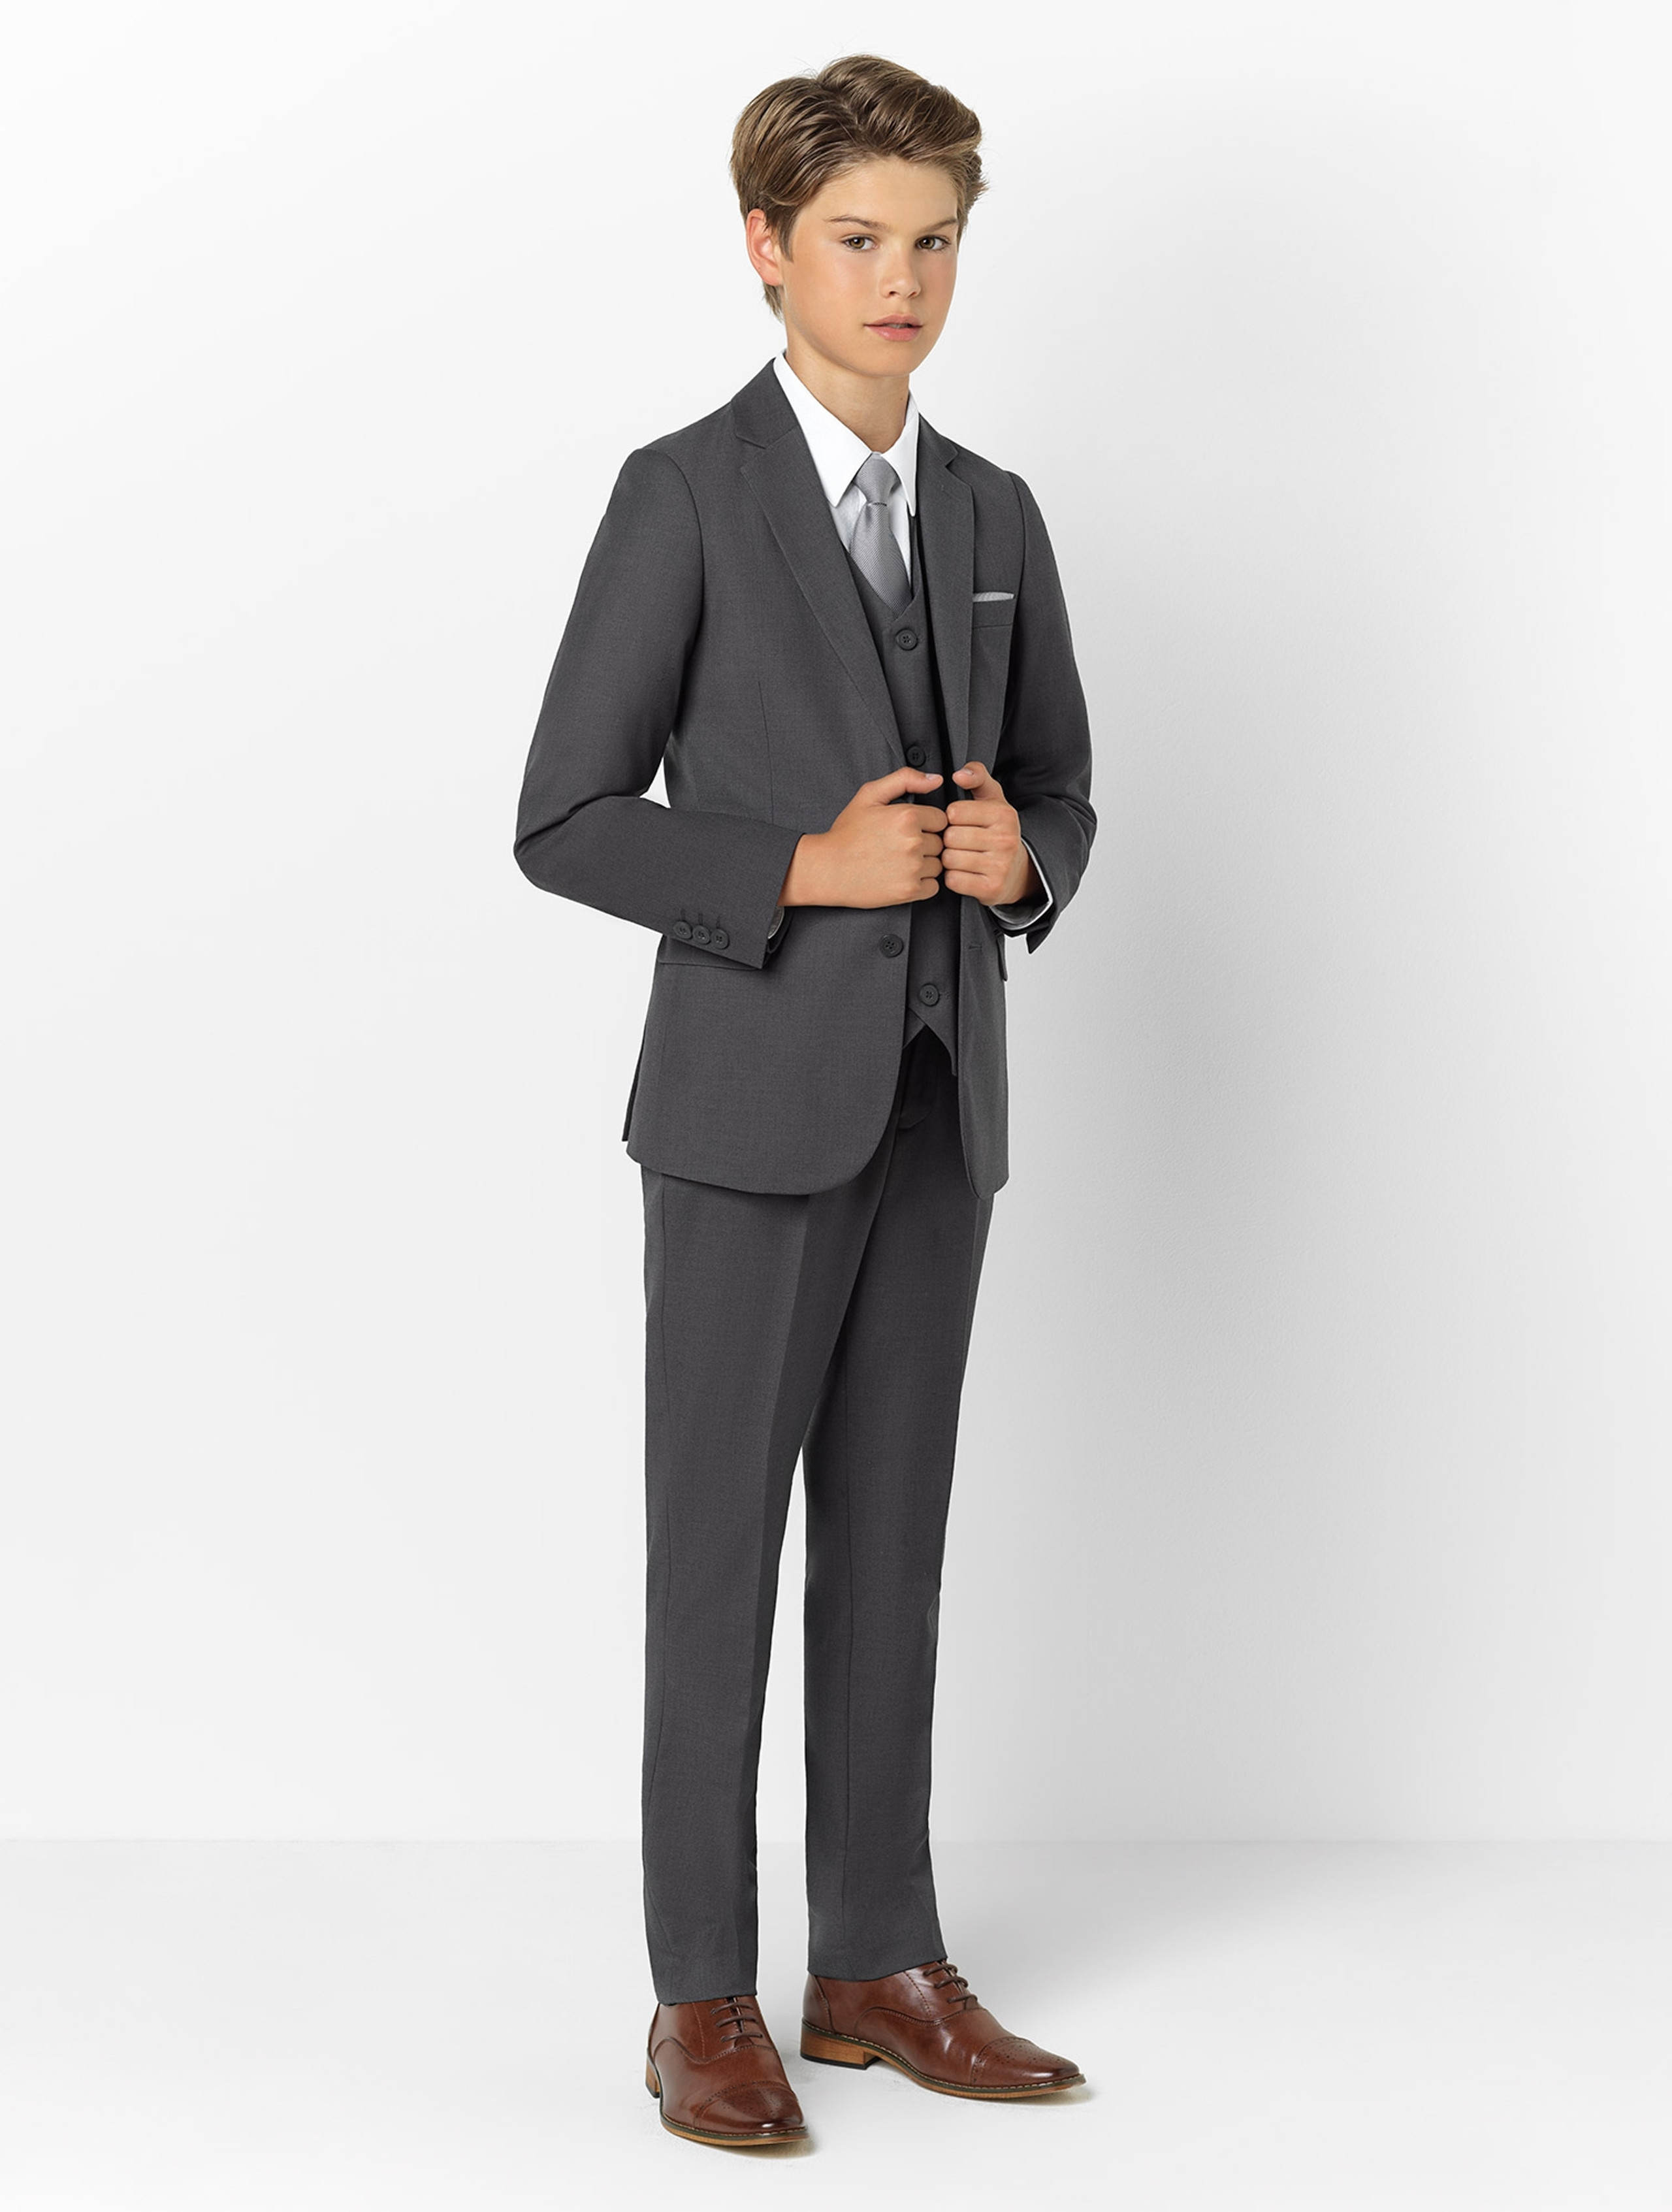 Boys charcoal page boy suit | Boys charcoal wedding outfit | Boys holy ...